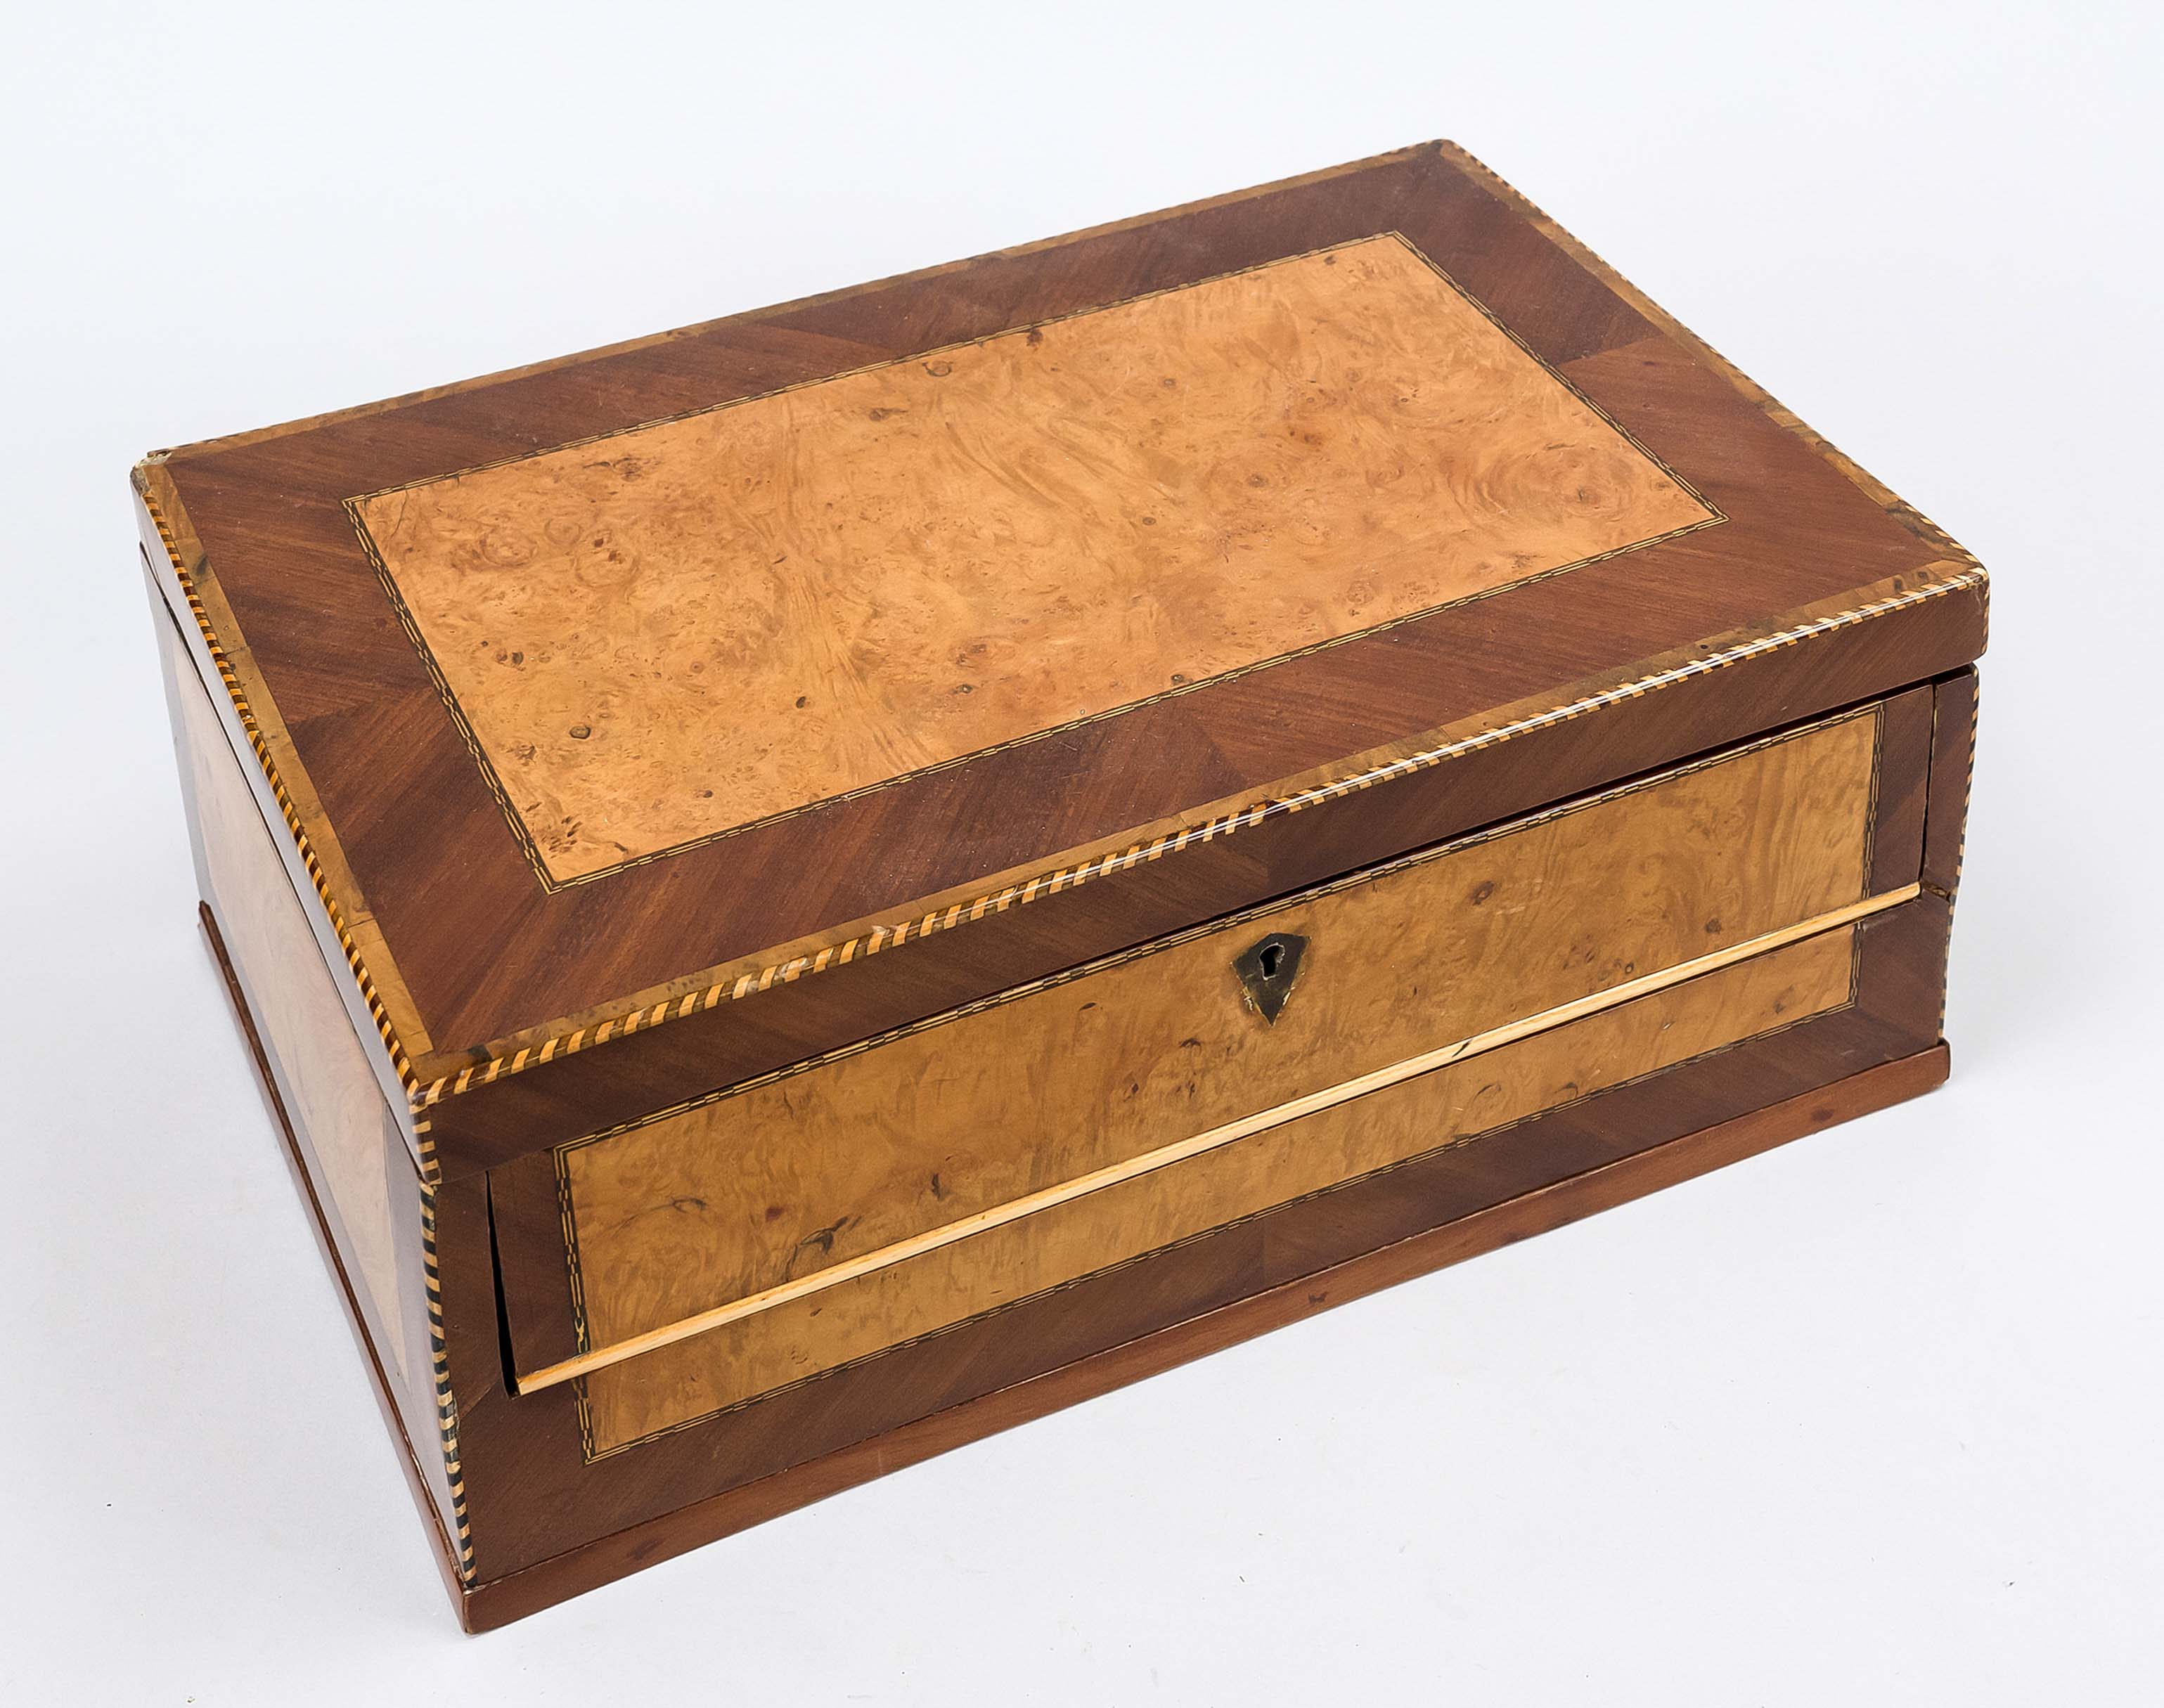 Wooden box with drawer, 19th century, birch body, veneered on all sides with bird's-eye maple and